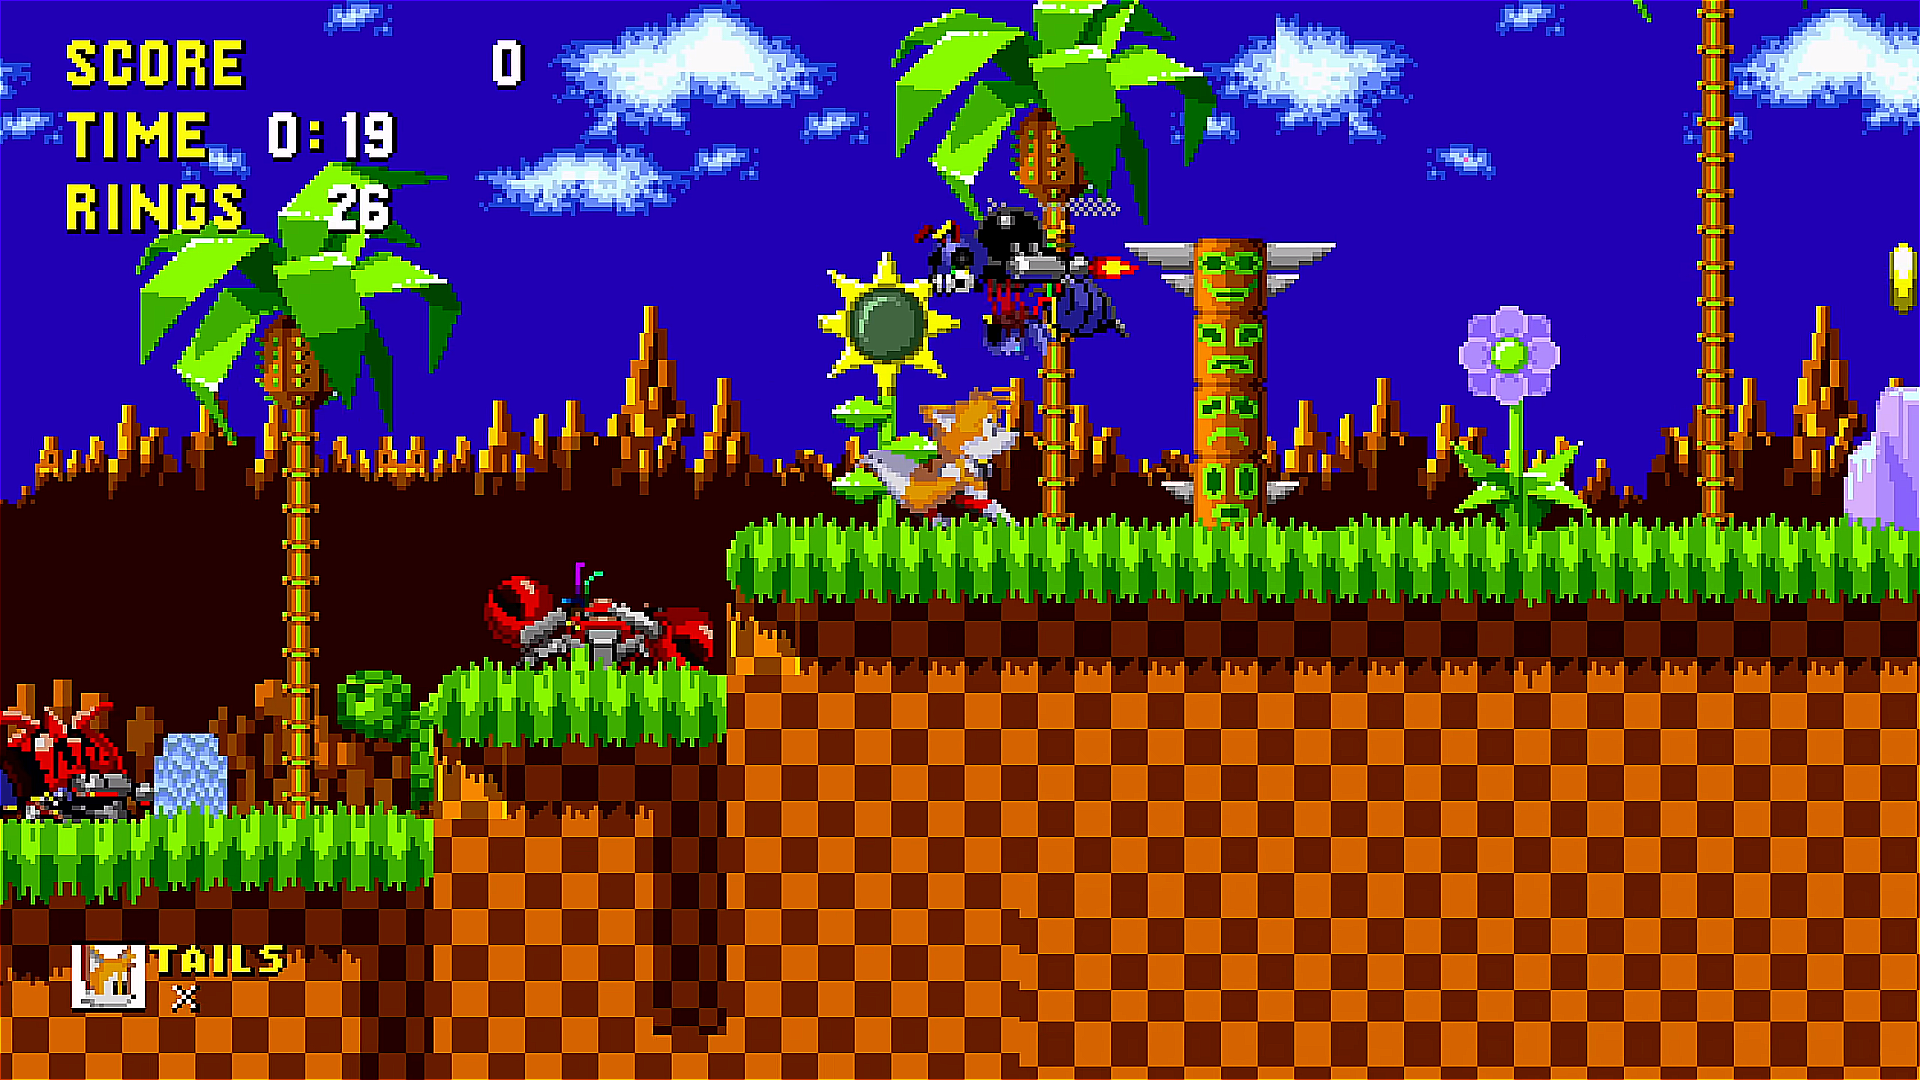 Green Hill Zone - Sonic.exe: Flashes of Souls. by Stydex786 on